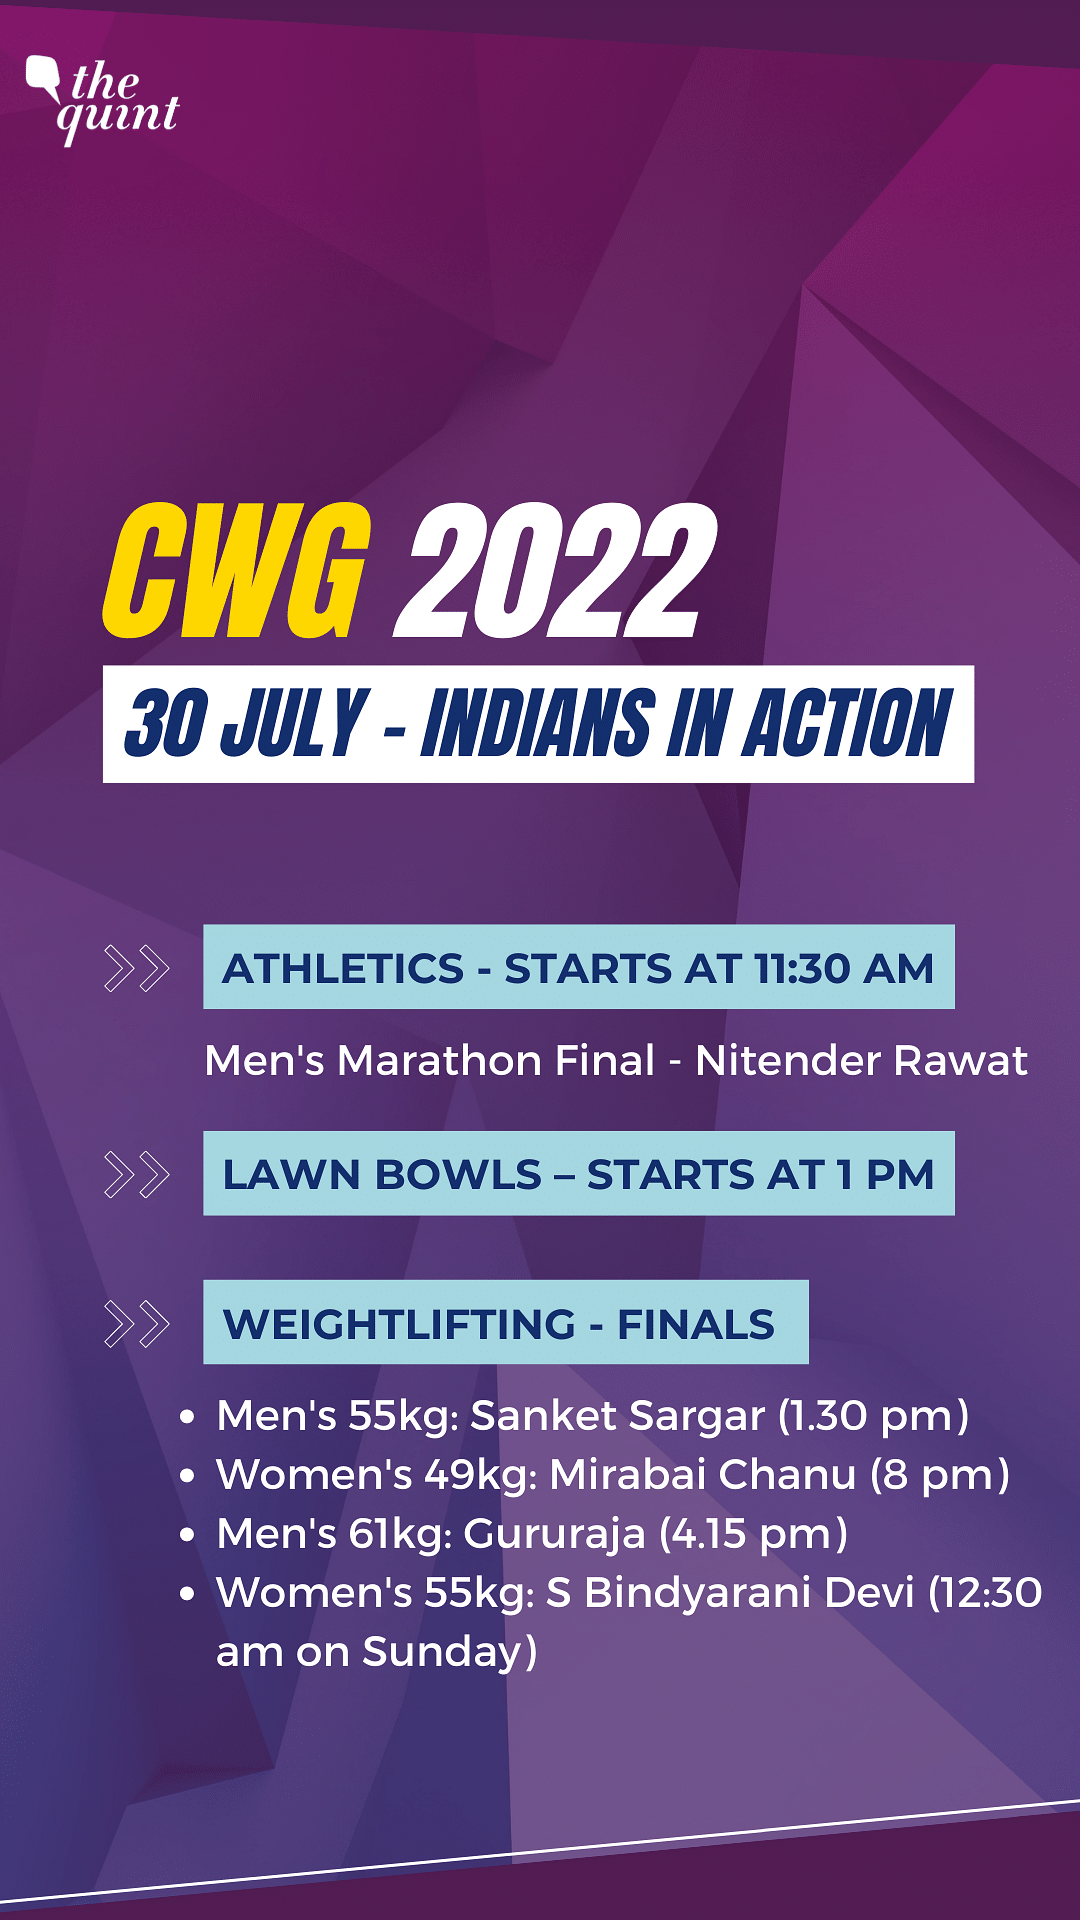 On Day 2, star athletes such as Mirabai Chanu and Lovlina Borgohain will be seen in action